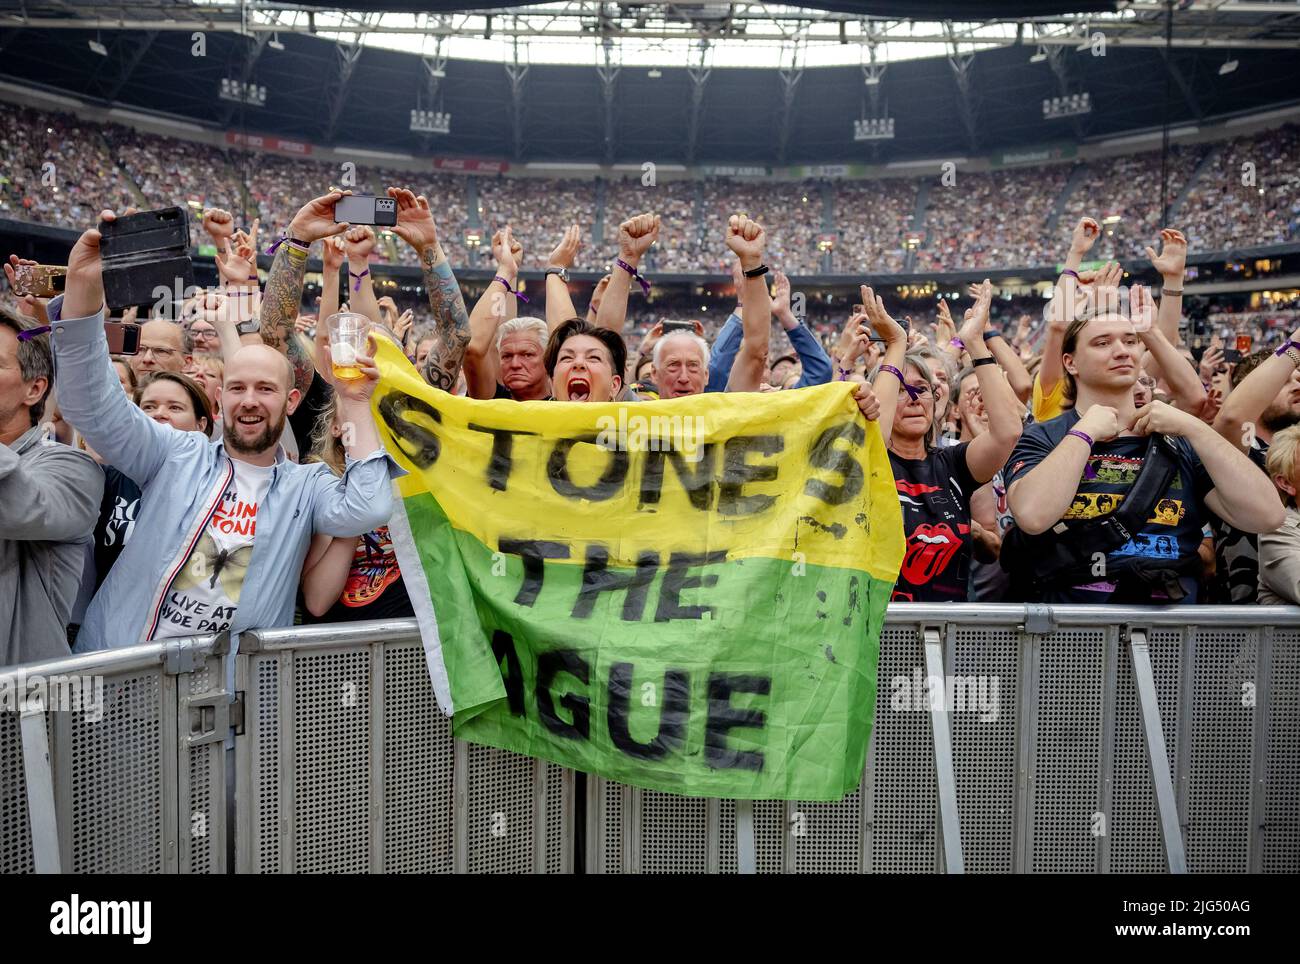 AMSTERDAM - 2022-07-07 20:48:25 AMSTERDAM - Audience during the concert of The Rolling Stones in the Johan Cruijff ArenA. With the SIXTY tour, Mick Jagger, Keith Richards and Ronnie Wood make their long-awaited return. ANP KIPPA ROBIN VAN LONKHUIJSEN netherlands out - belgium out Stock Photo